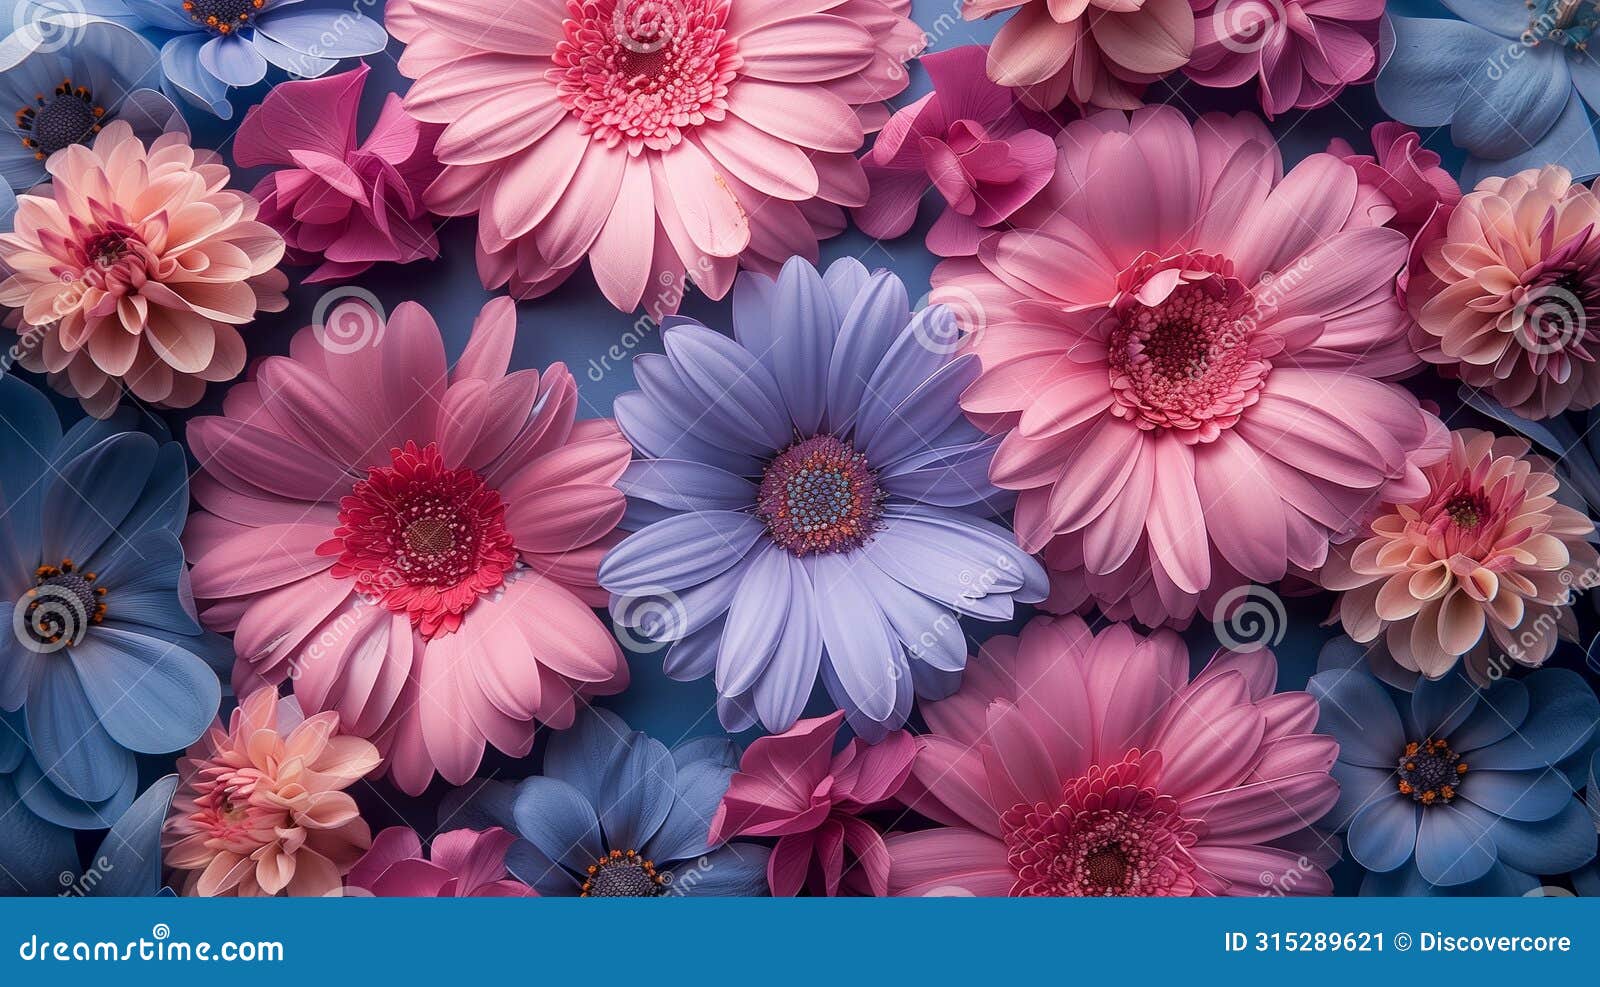 bountiful blossoms in pink and blue lush floral background